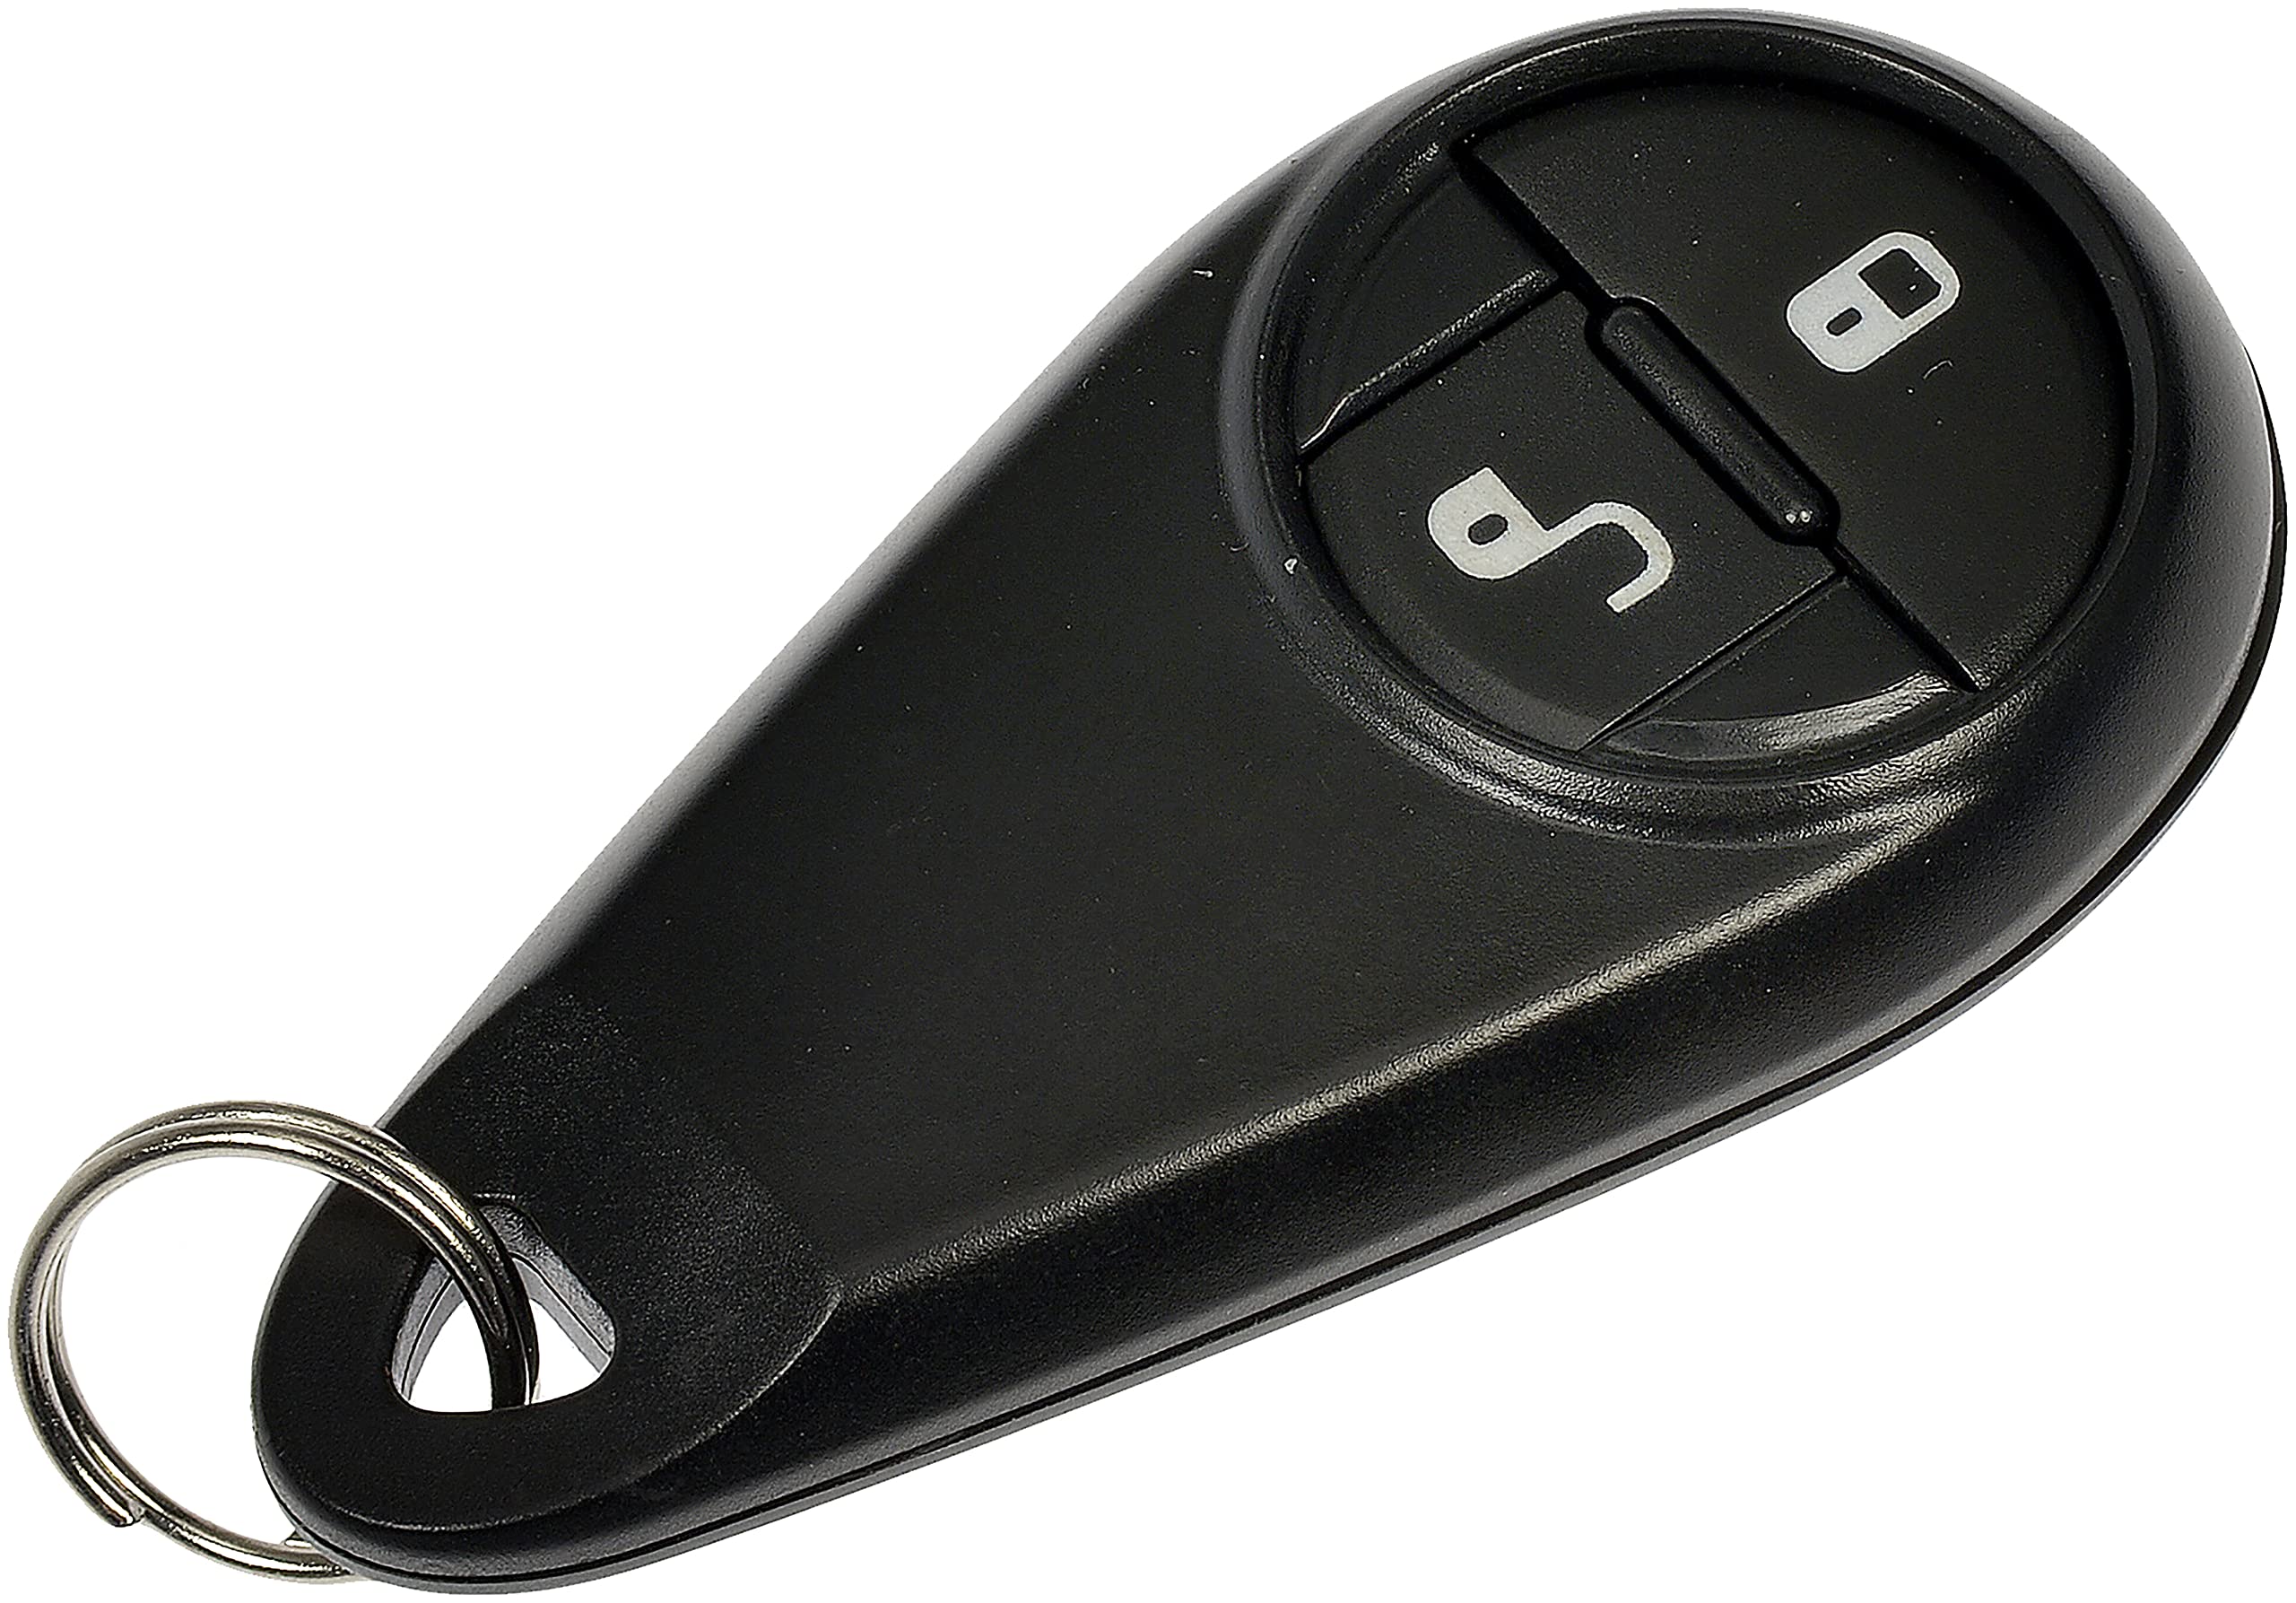 Dorman 99152 Keyless Entry Remote 2 Button Compatible with Select Subaru Models